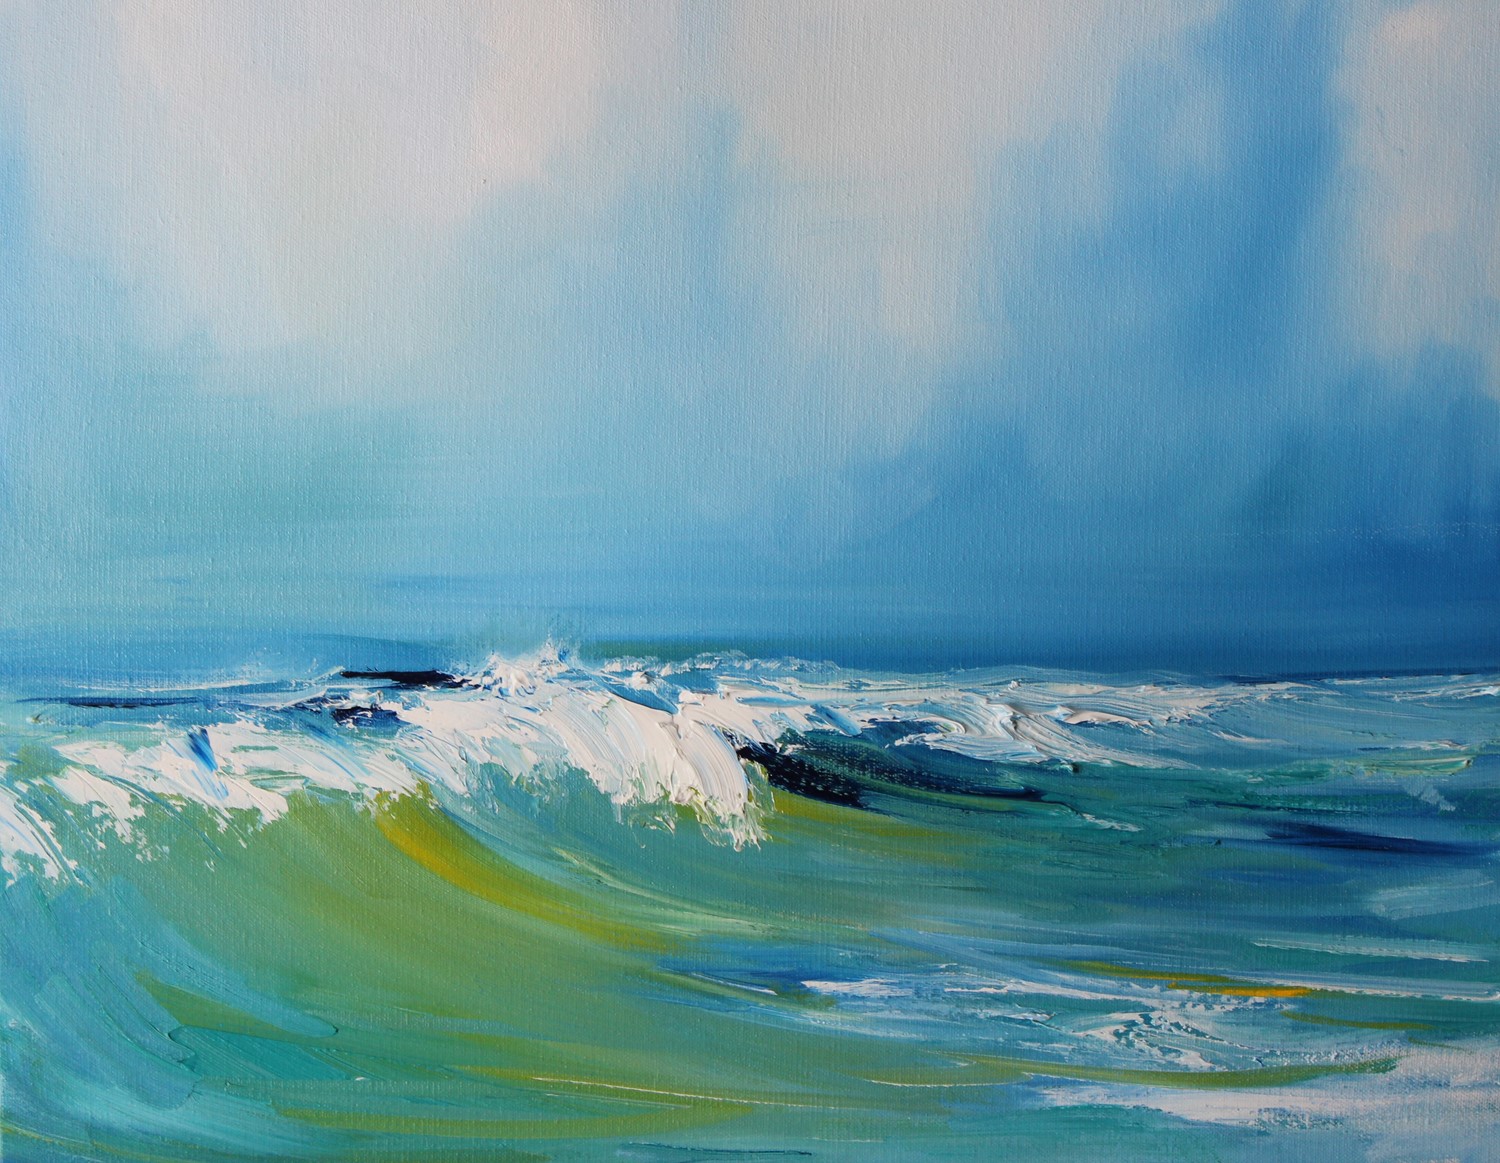 'The Crest of a Wave' by artist Rosanne Barr